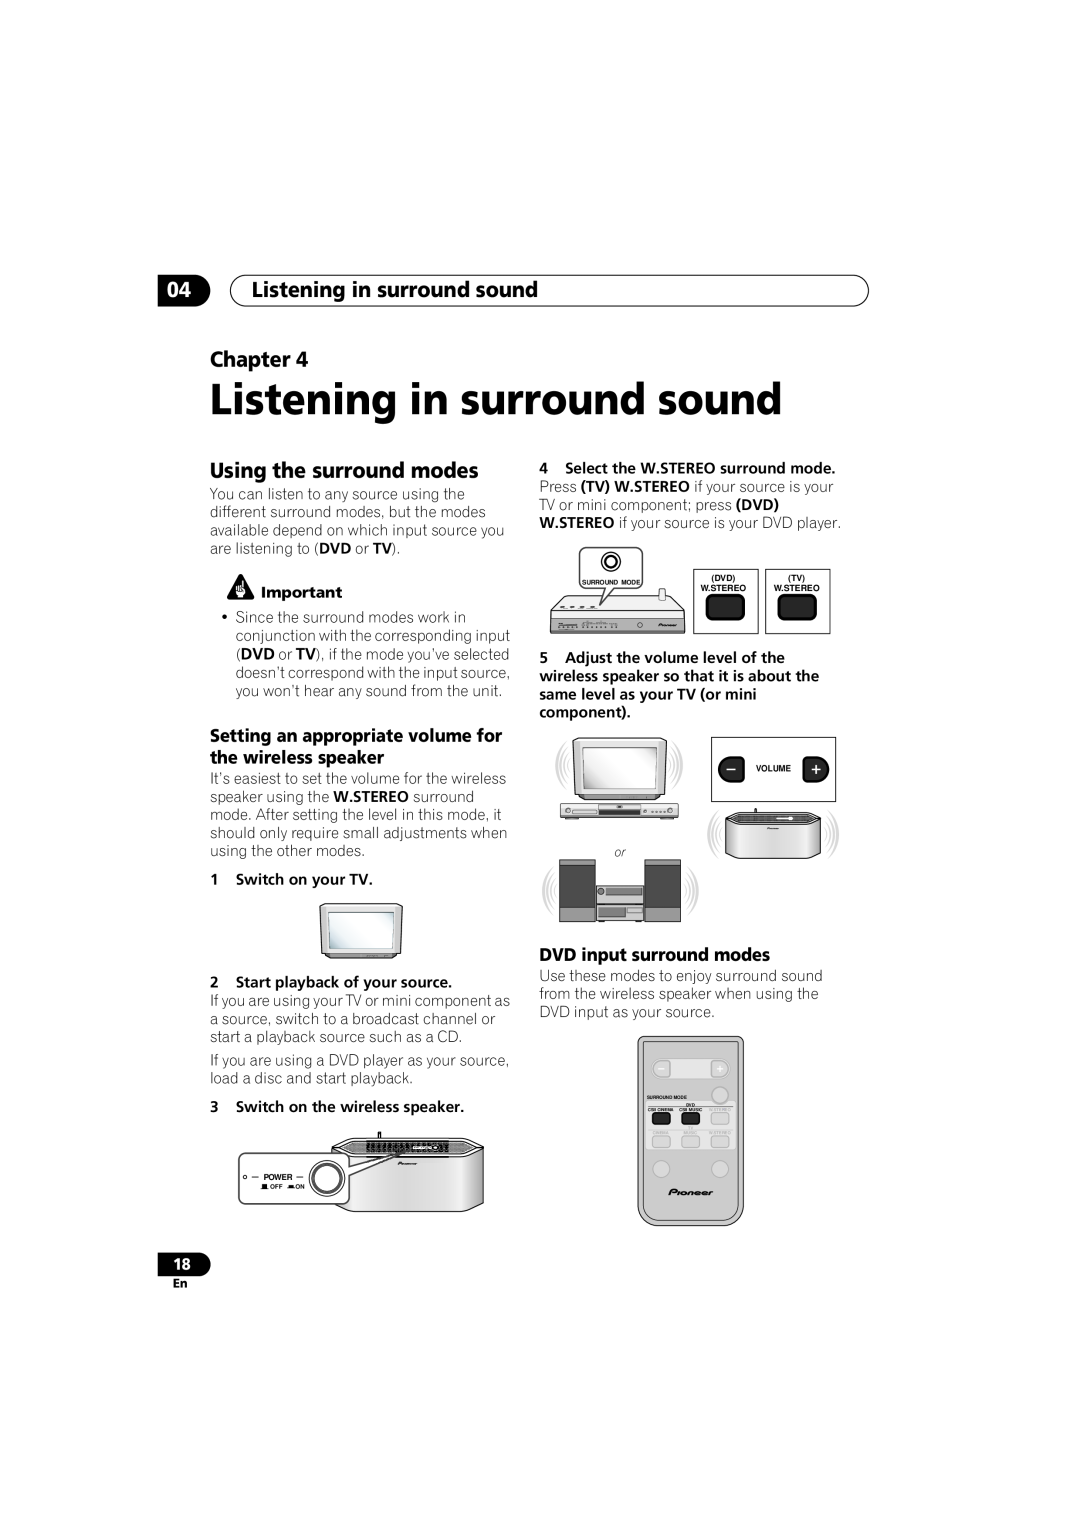 Pioneer XW-HT1 manual 04Listening in surround sound Chapter, Using the surround modes, DVD input surround modes 